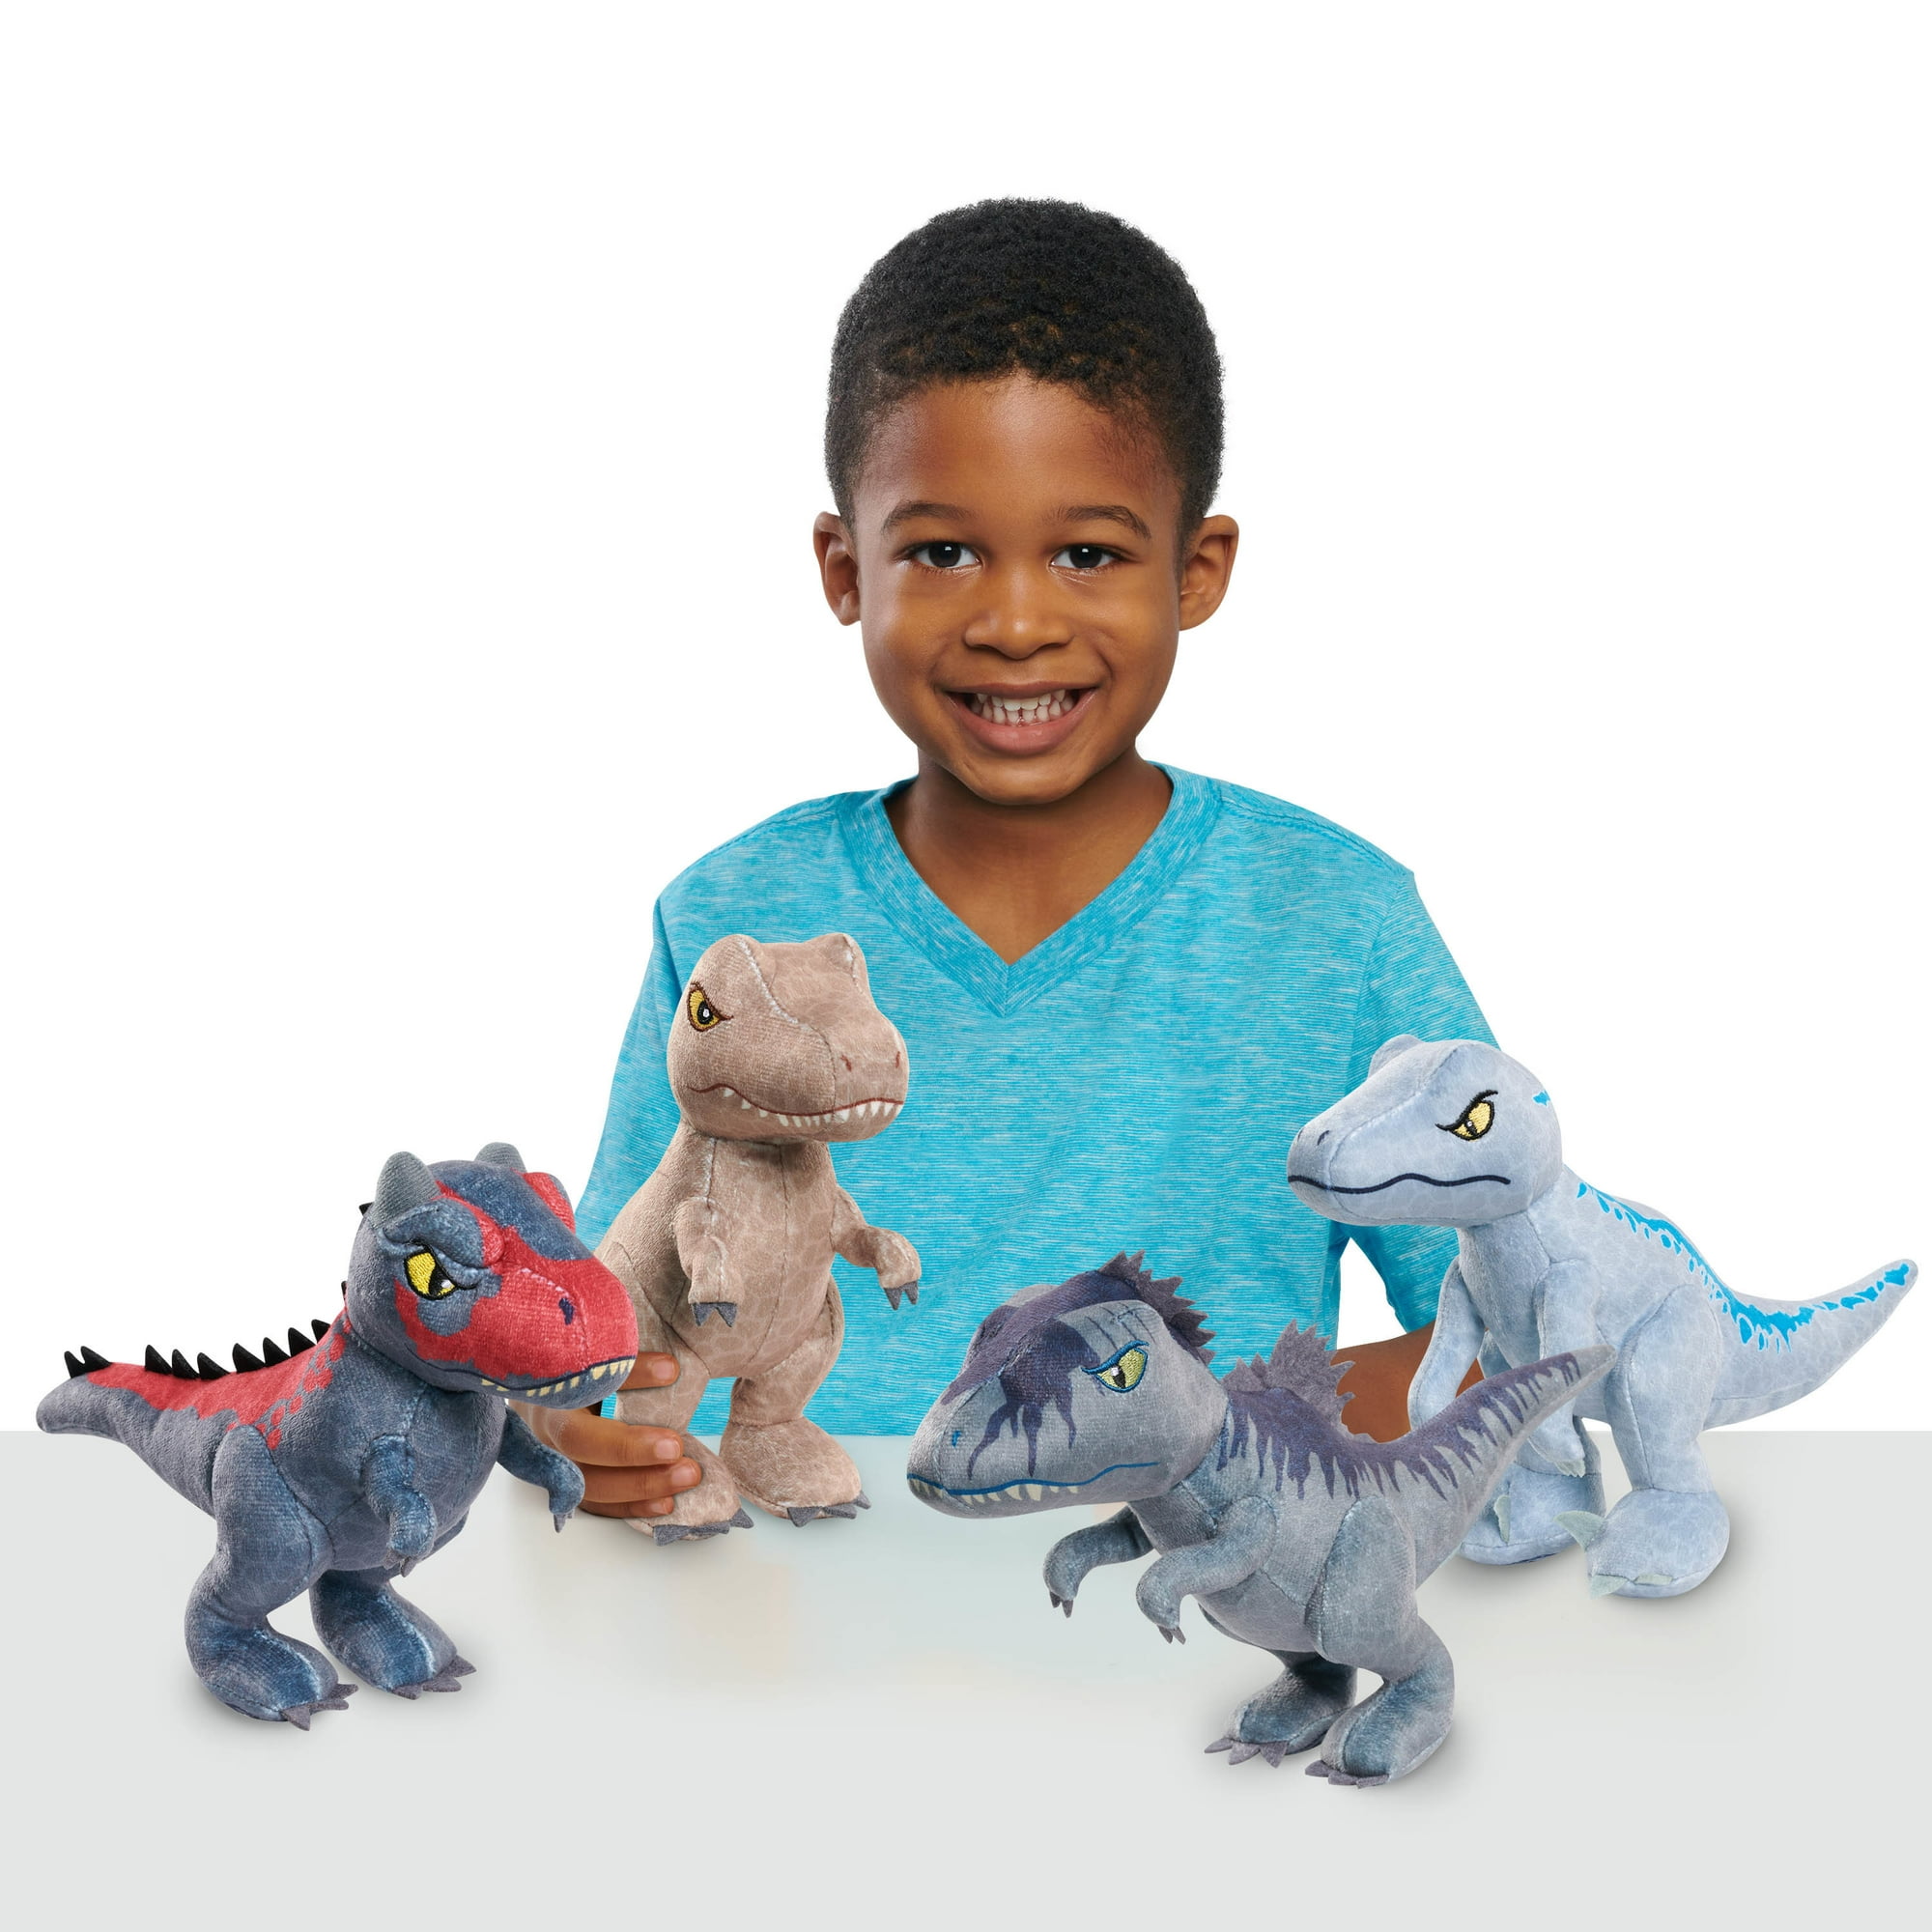 4-Count Just Play Kids' Jurassic World 7" Dinosaur Plush Toy Set $7.97 ($1.99 Each) + Free Shipping w/ Walmart+ or on $35+